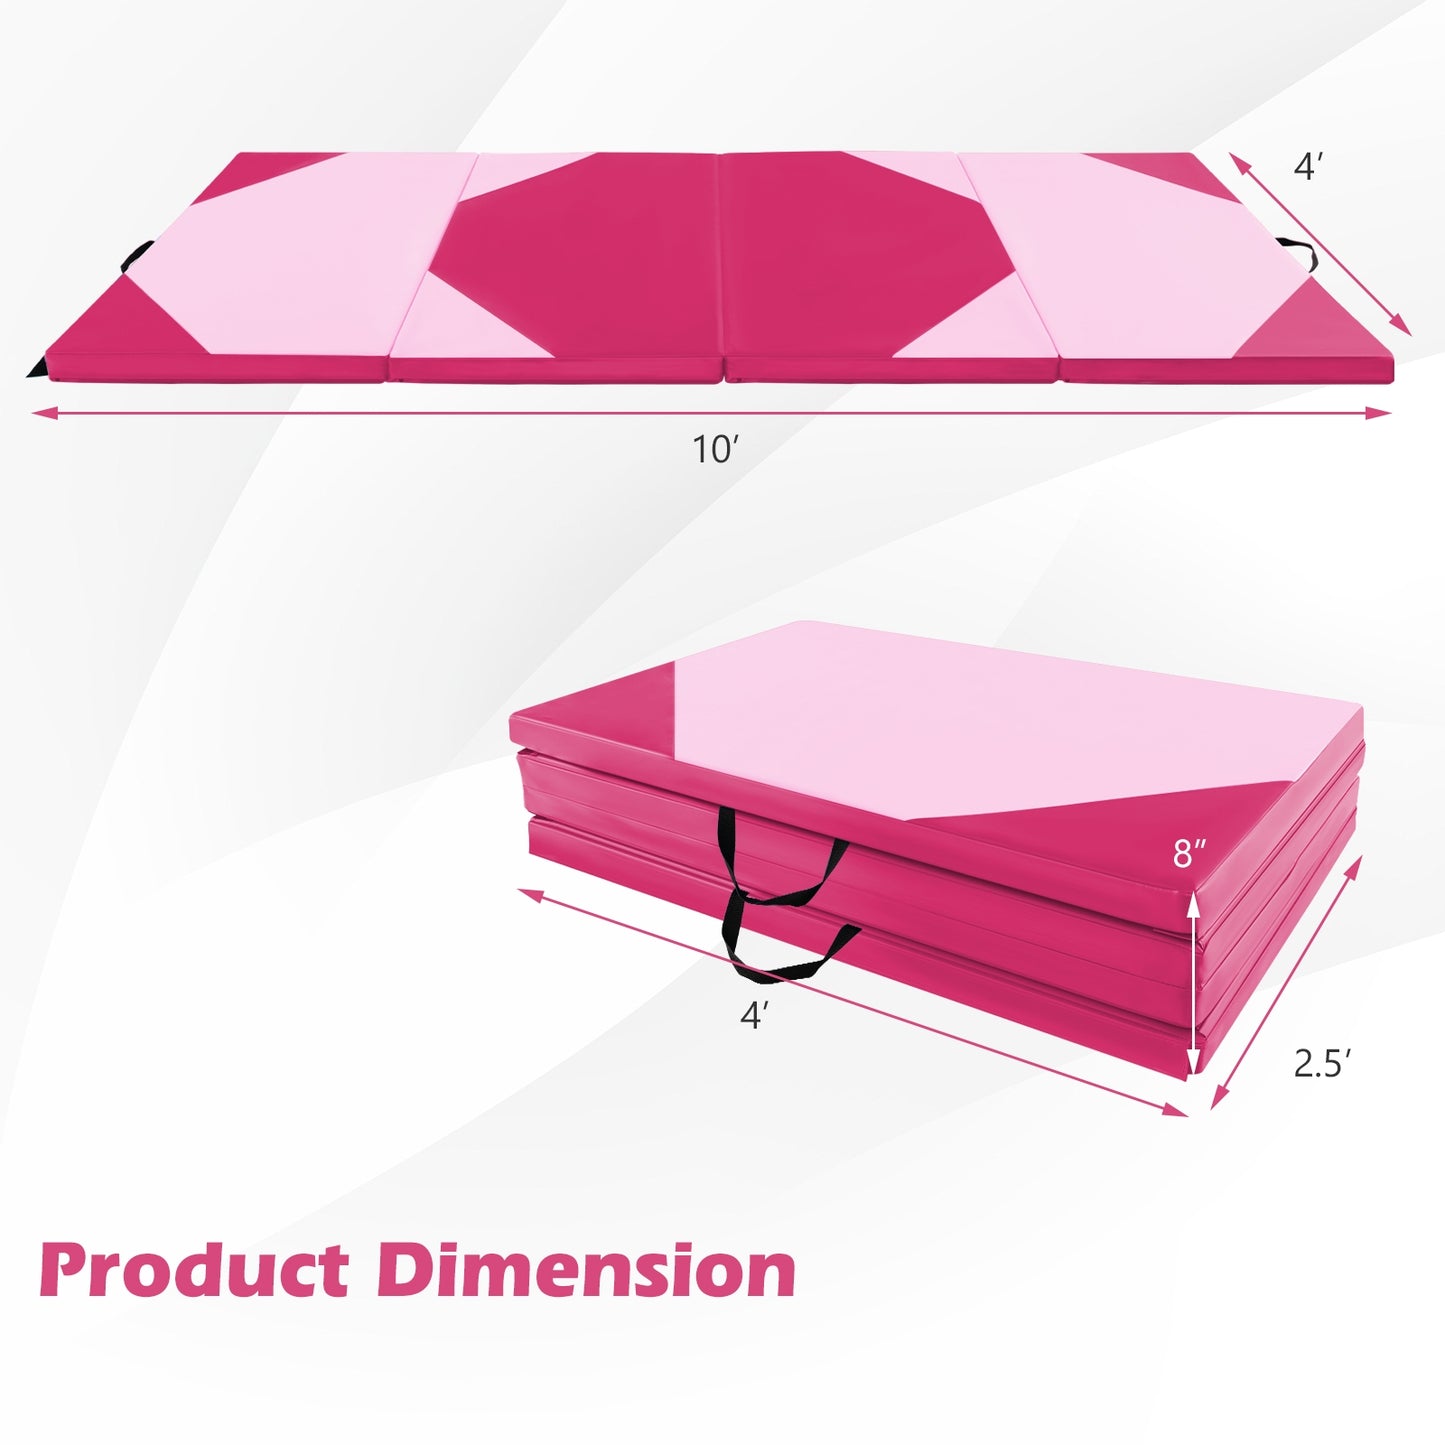 10' x 4' x 2" Folding Exercise Mat with Hook and Loop Fasteners-Hot Pink